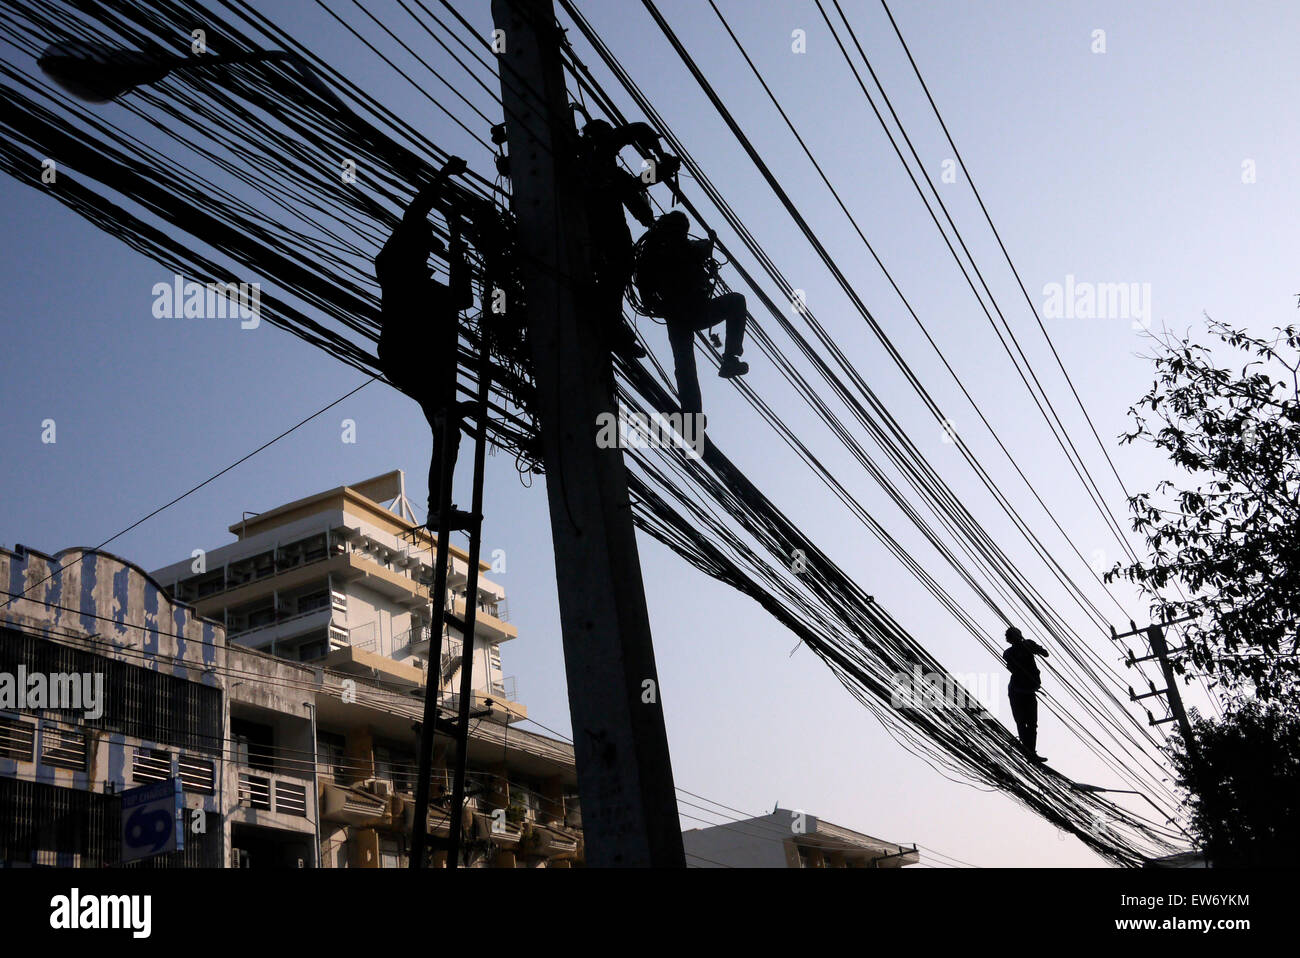 Electrical cable fitters working in a dangerous situation above a city street in Pattaya Thailand Stock Photo